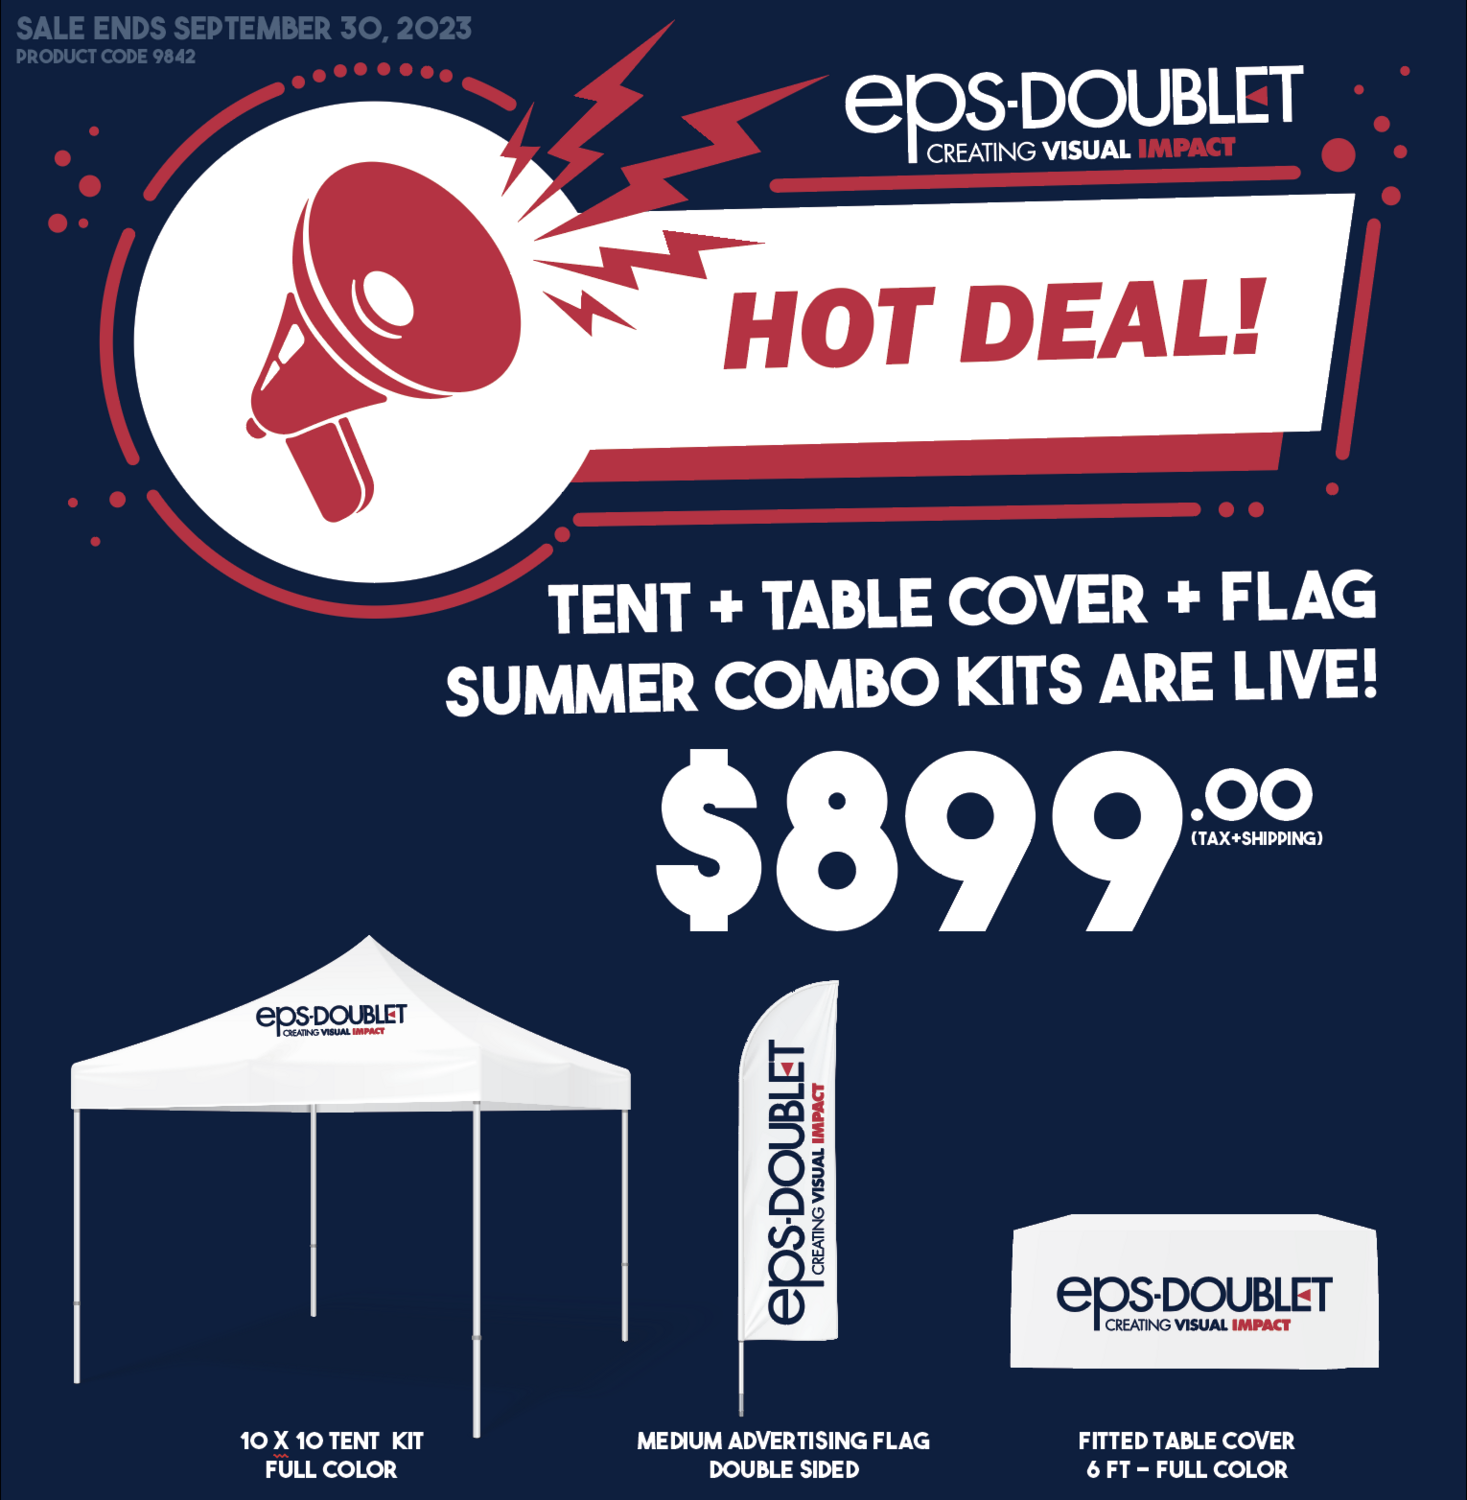 Store | eps-DOUBLET | Find your tent, table cover, flag, and more!